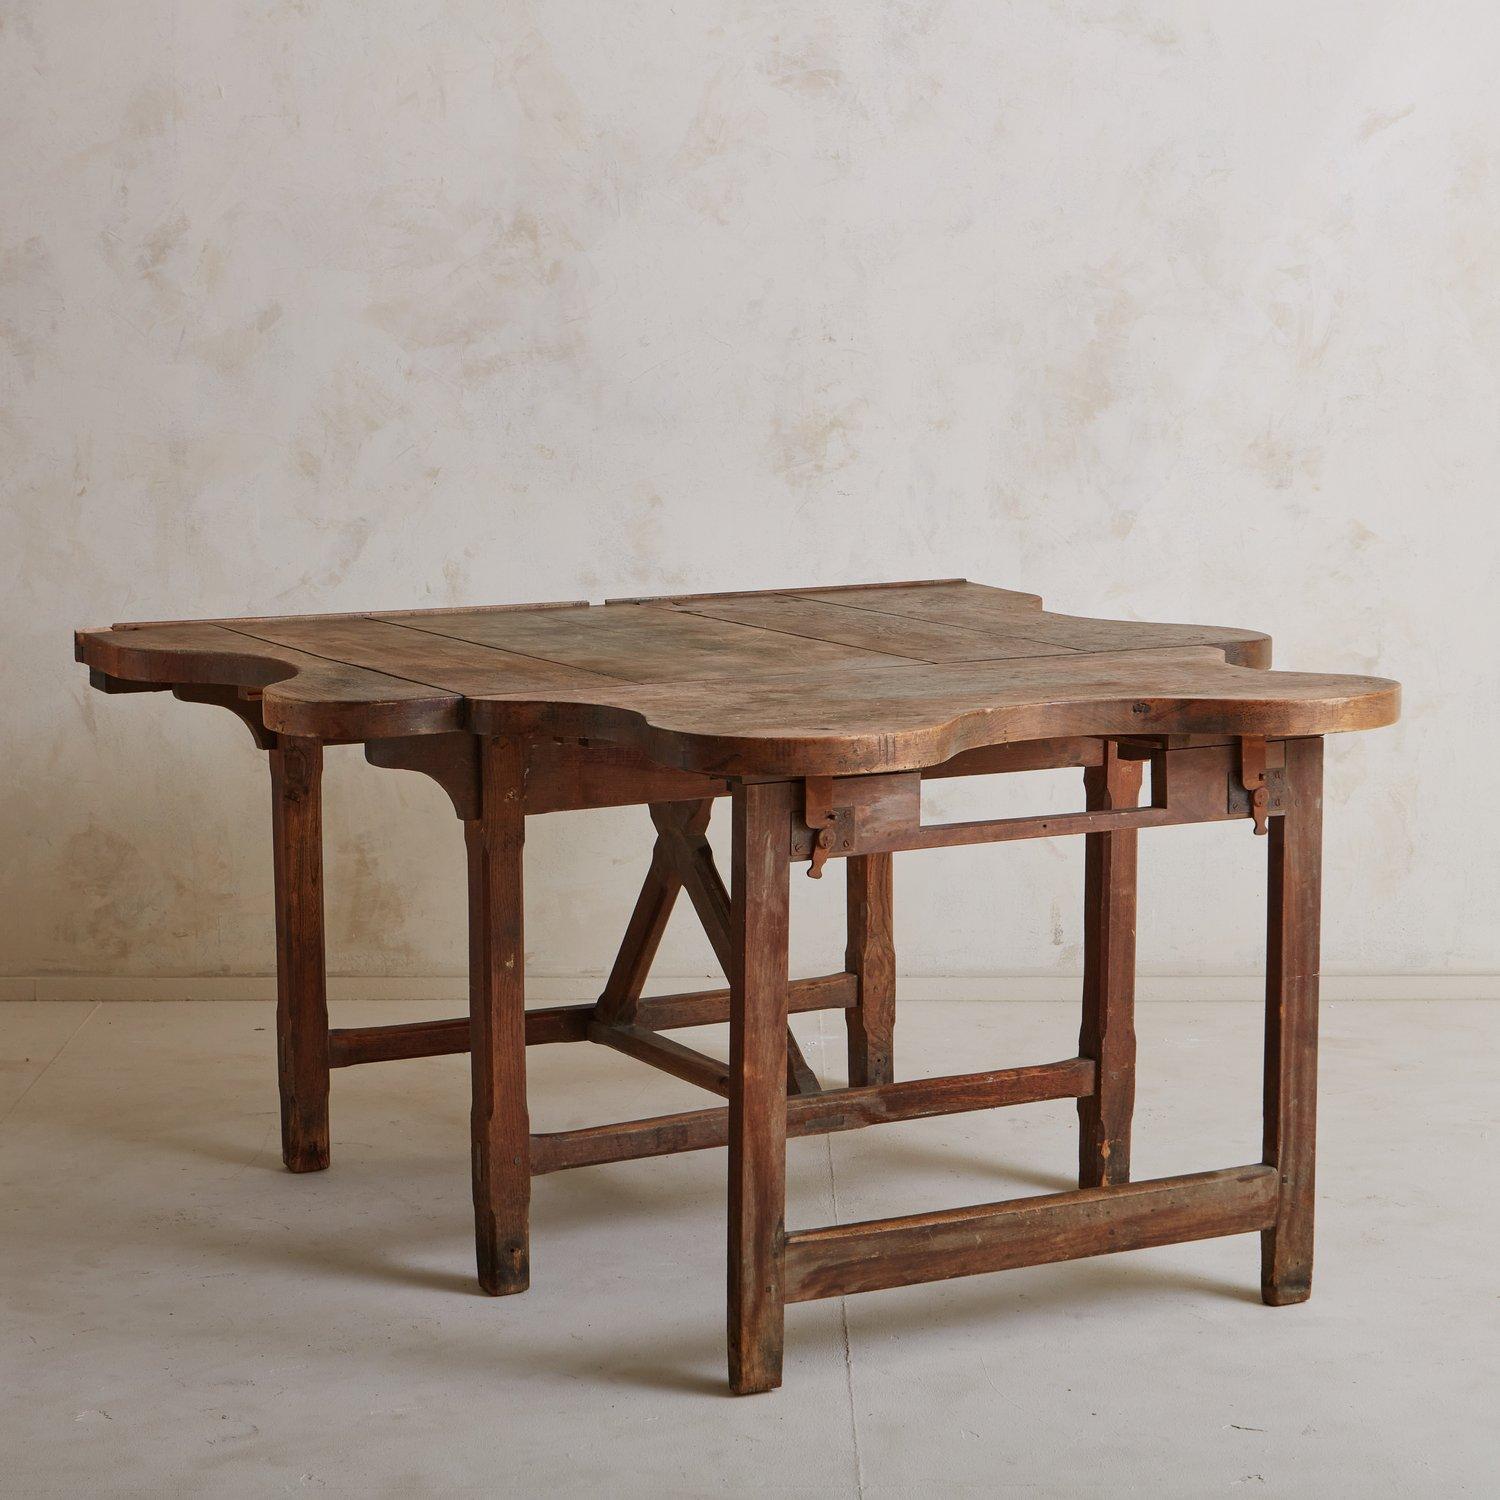 An antique pine wood table sourced in France. This unique piece has one leaf with curved edges and features a stunning patina. The leaf attaches to the sides of the table with pegs and stands on hinged wooden supports, making it easily collapsible